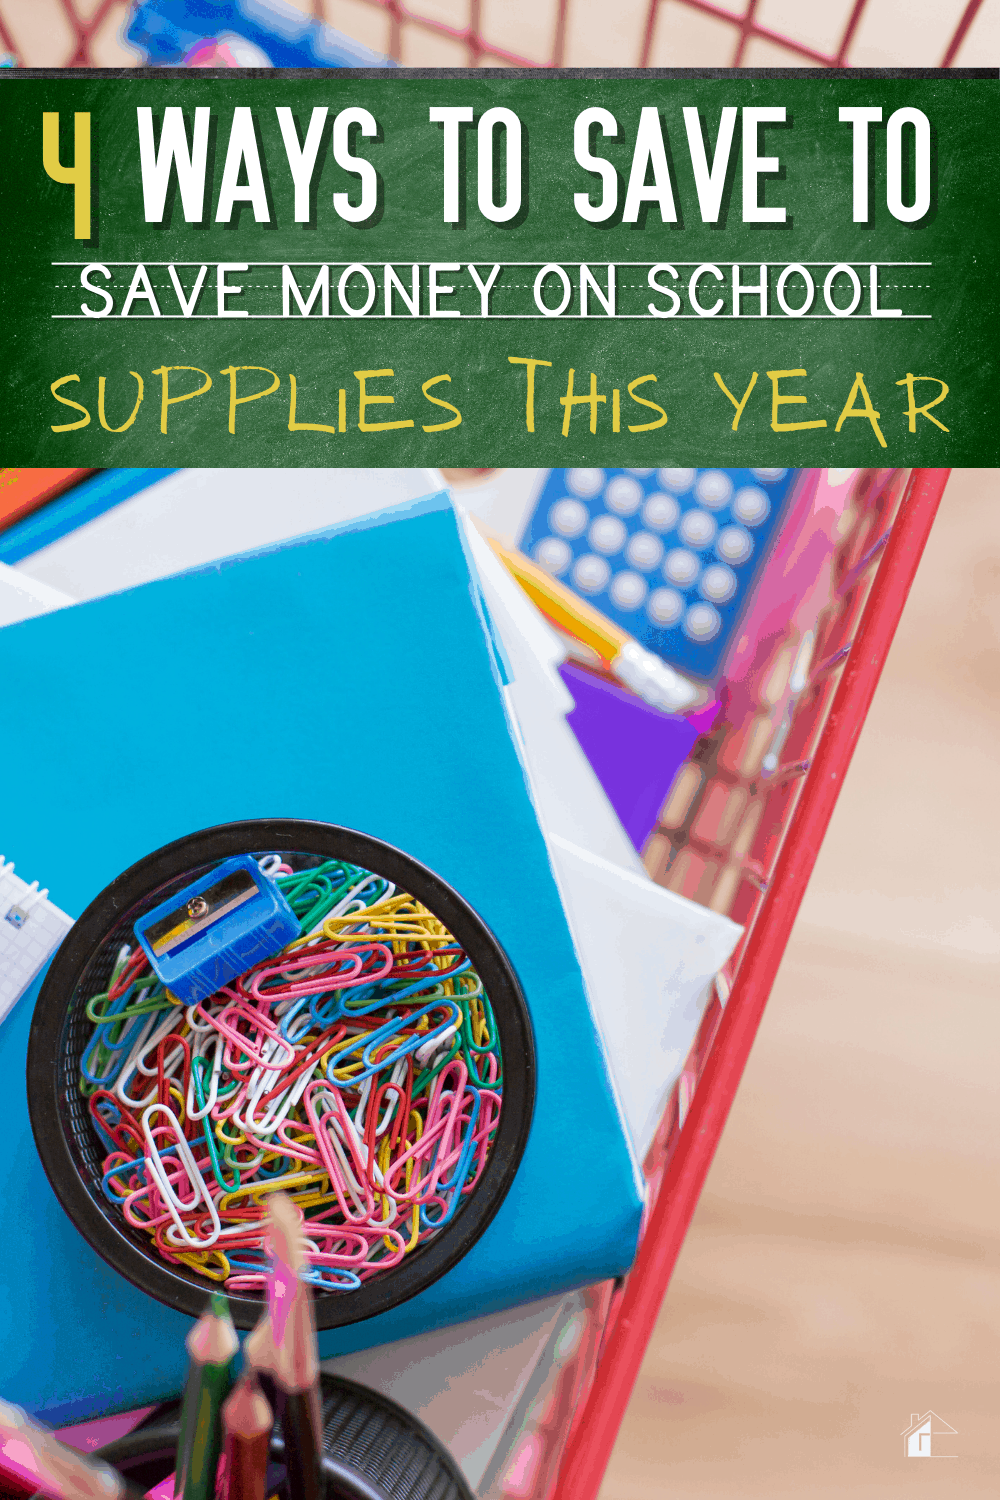 Learn four ways to avoid wasting money on back to school supplies this season. Get what your child needs and save money in the process. via @mystayathome